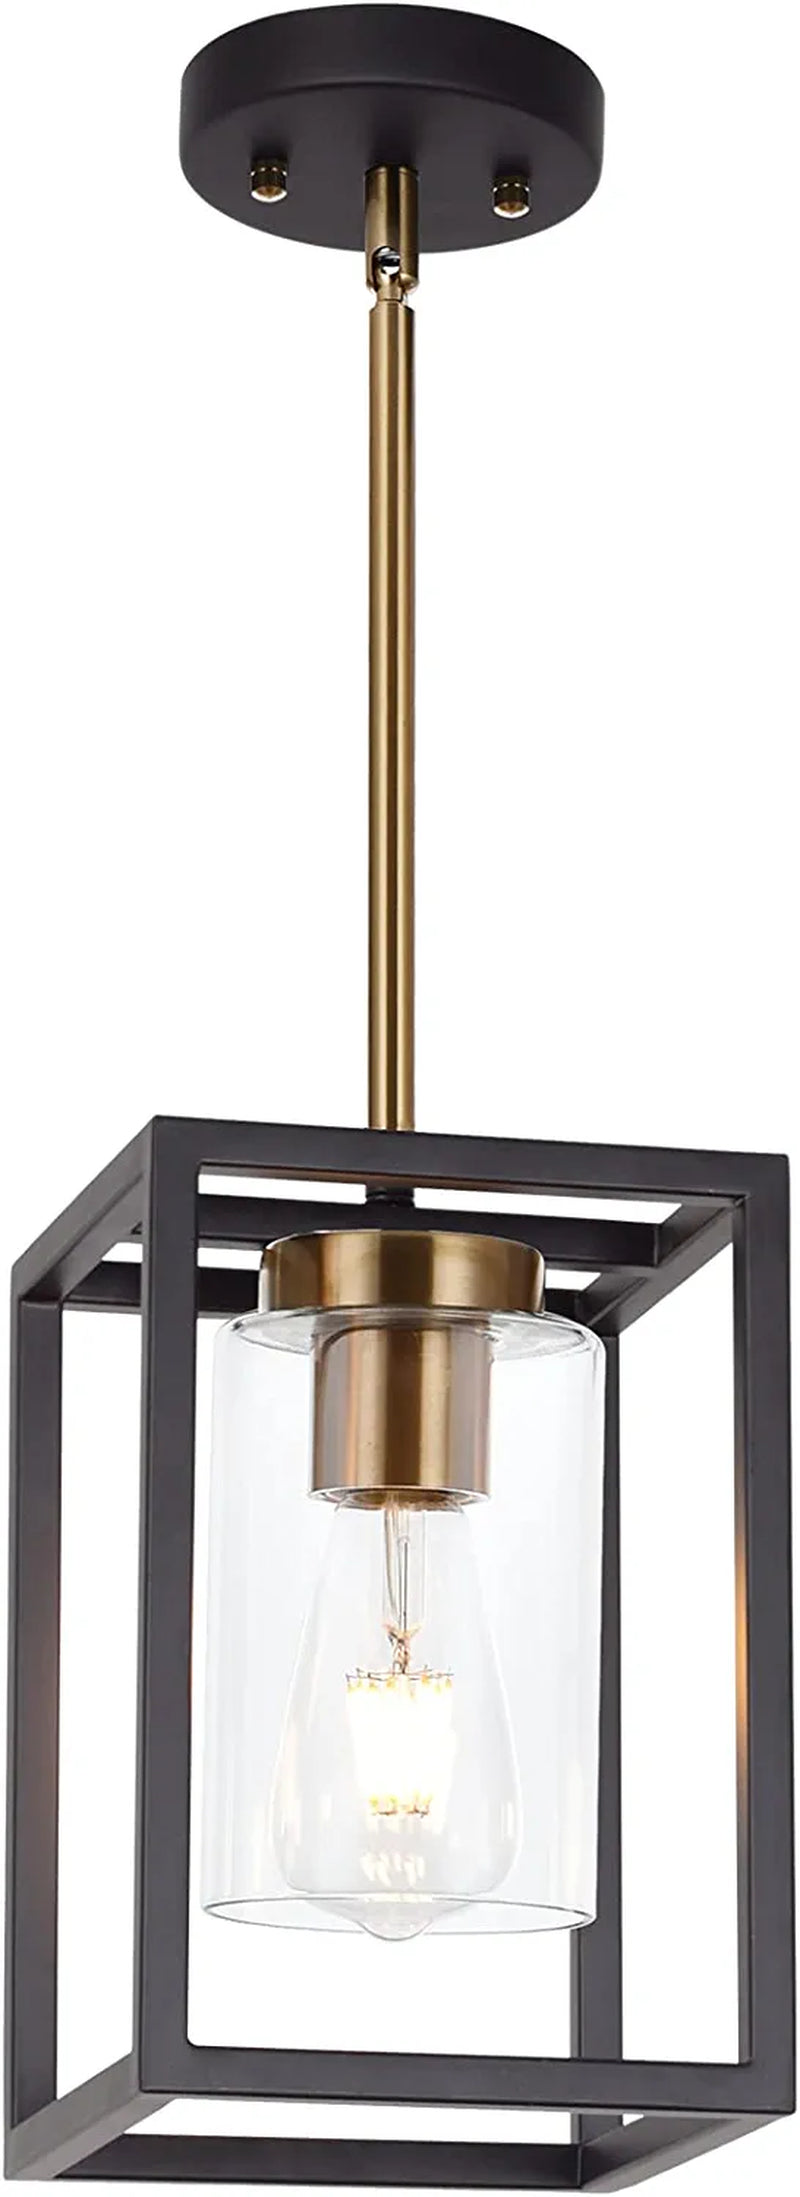 VINLUZ Single 1 Light Black and Brushed Nickel Modern Glass Pendant Light Industrial Modern Metal Chandelier with Clear Glass Shade for Dining Room Kitchen Island Foyer Cafe Home & Garden > Lighting > Lighting Fixtures VINLUZ Black and Brushed Brass 1 Light 